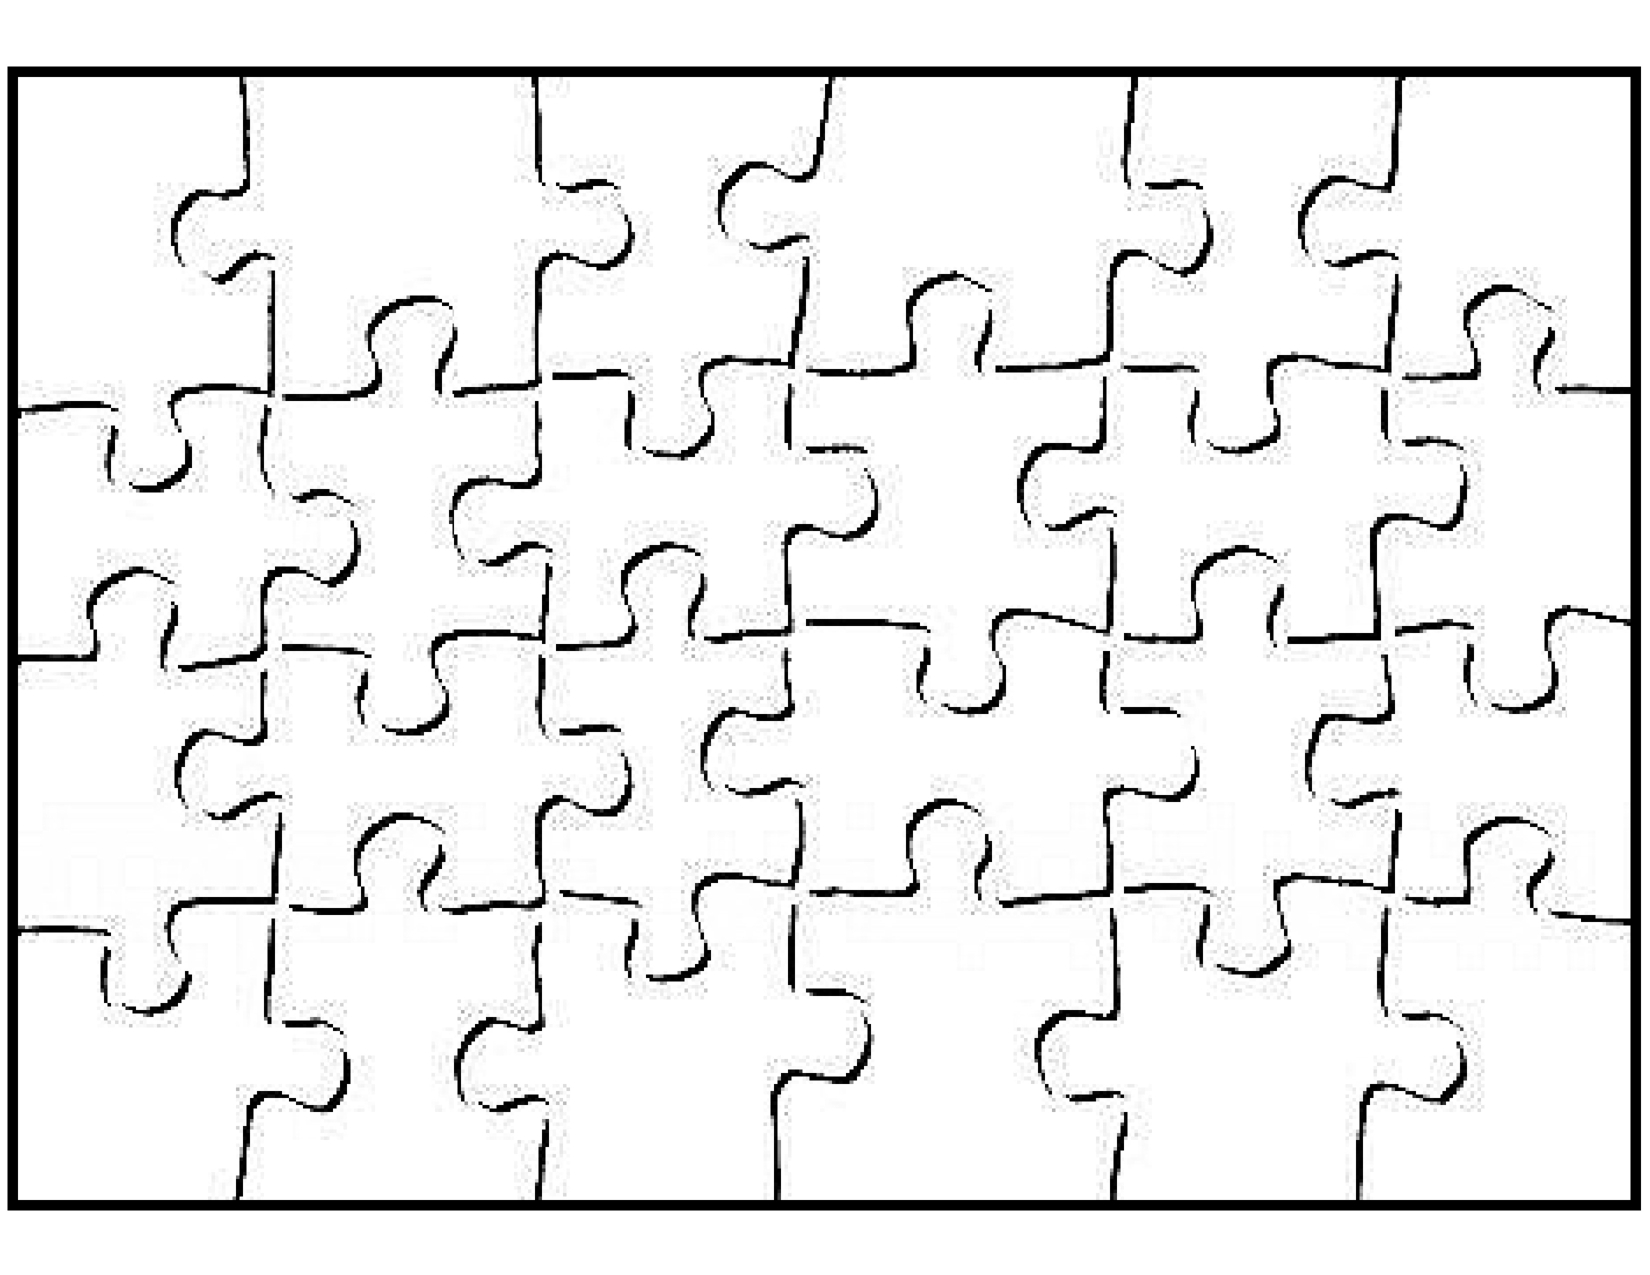 Image Result For Puzzle Template 25 Pieces | School | Art Classroom - Printable Jigsaw Puzzles For Middle School